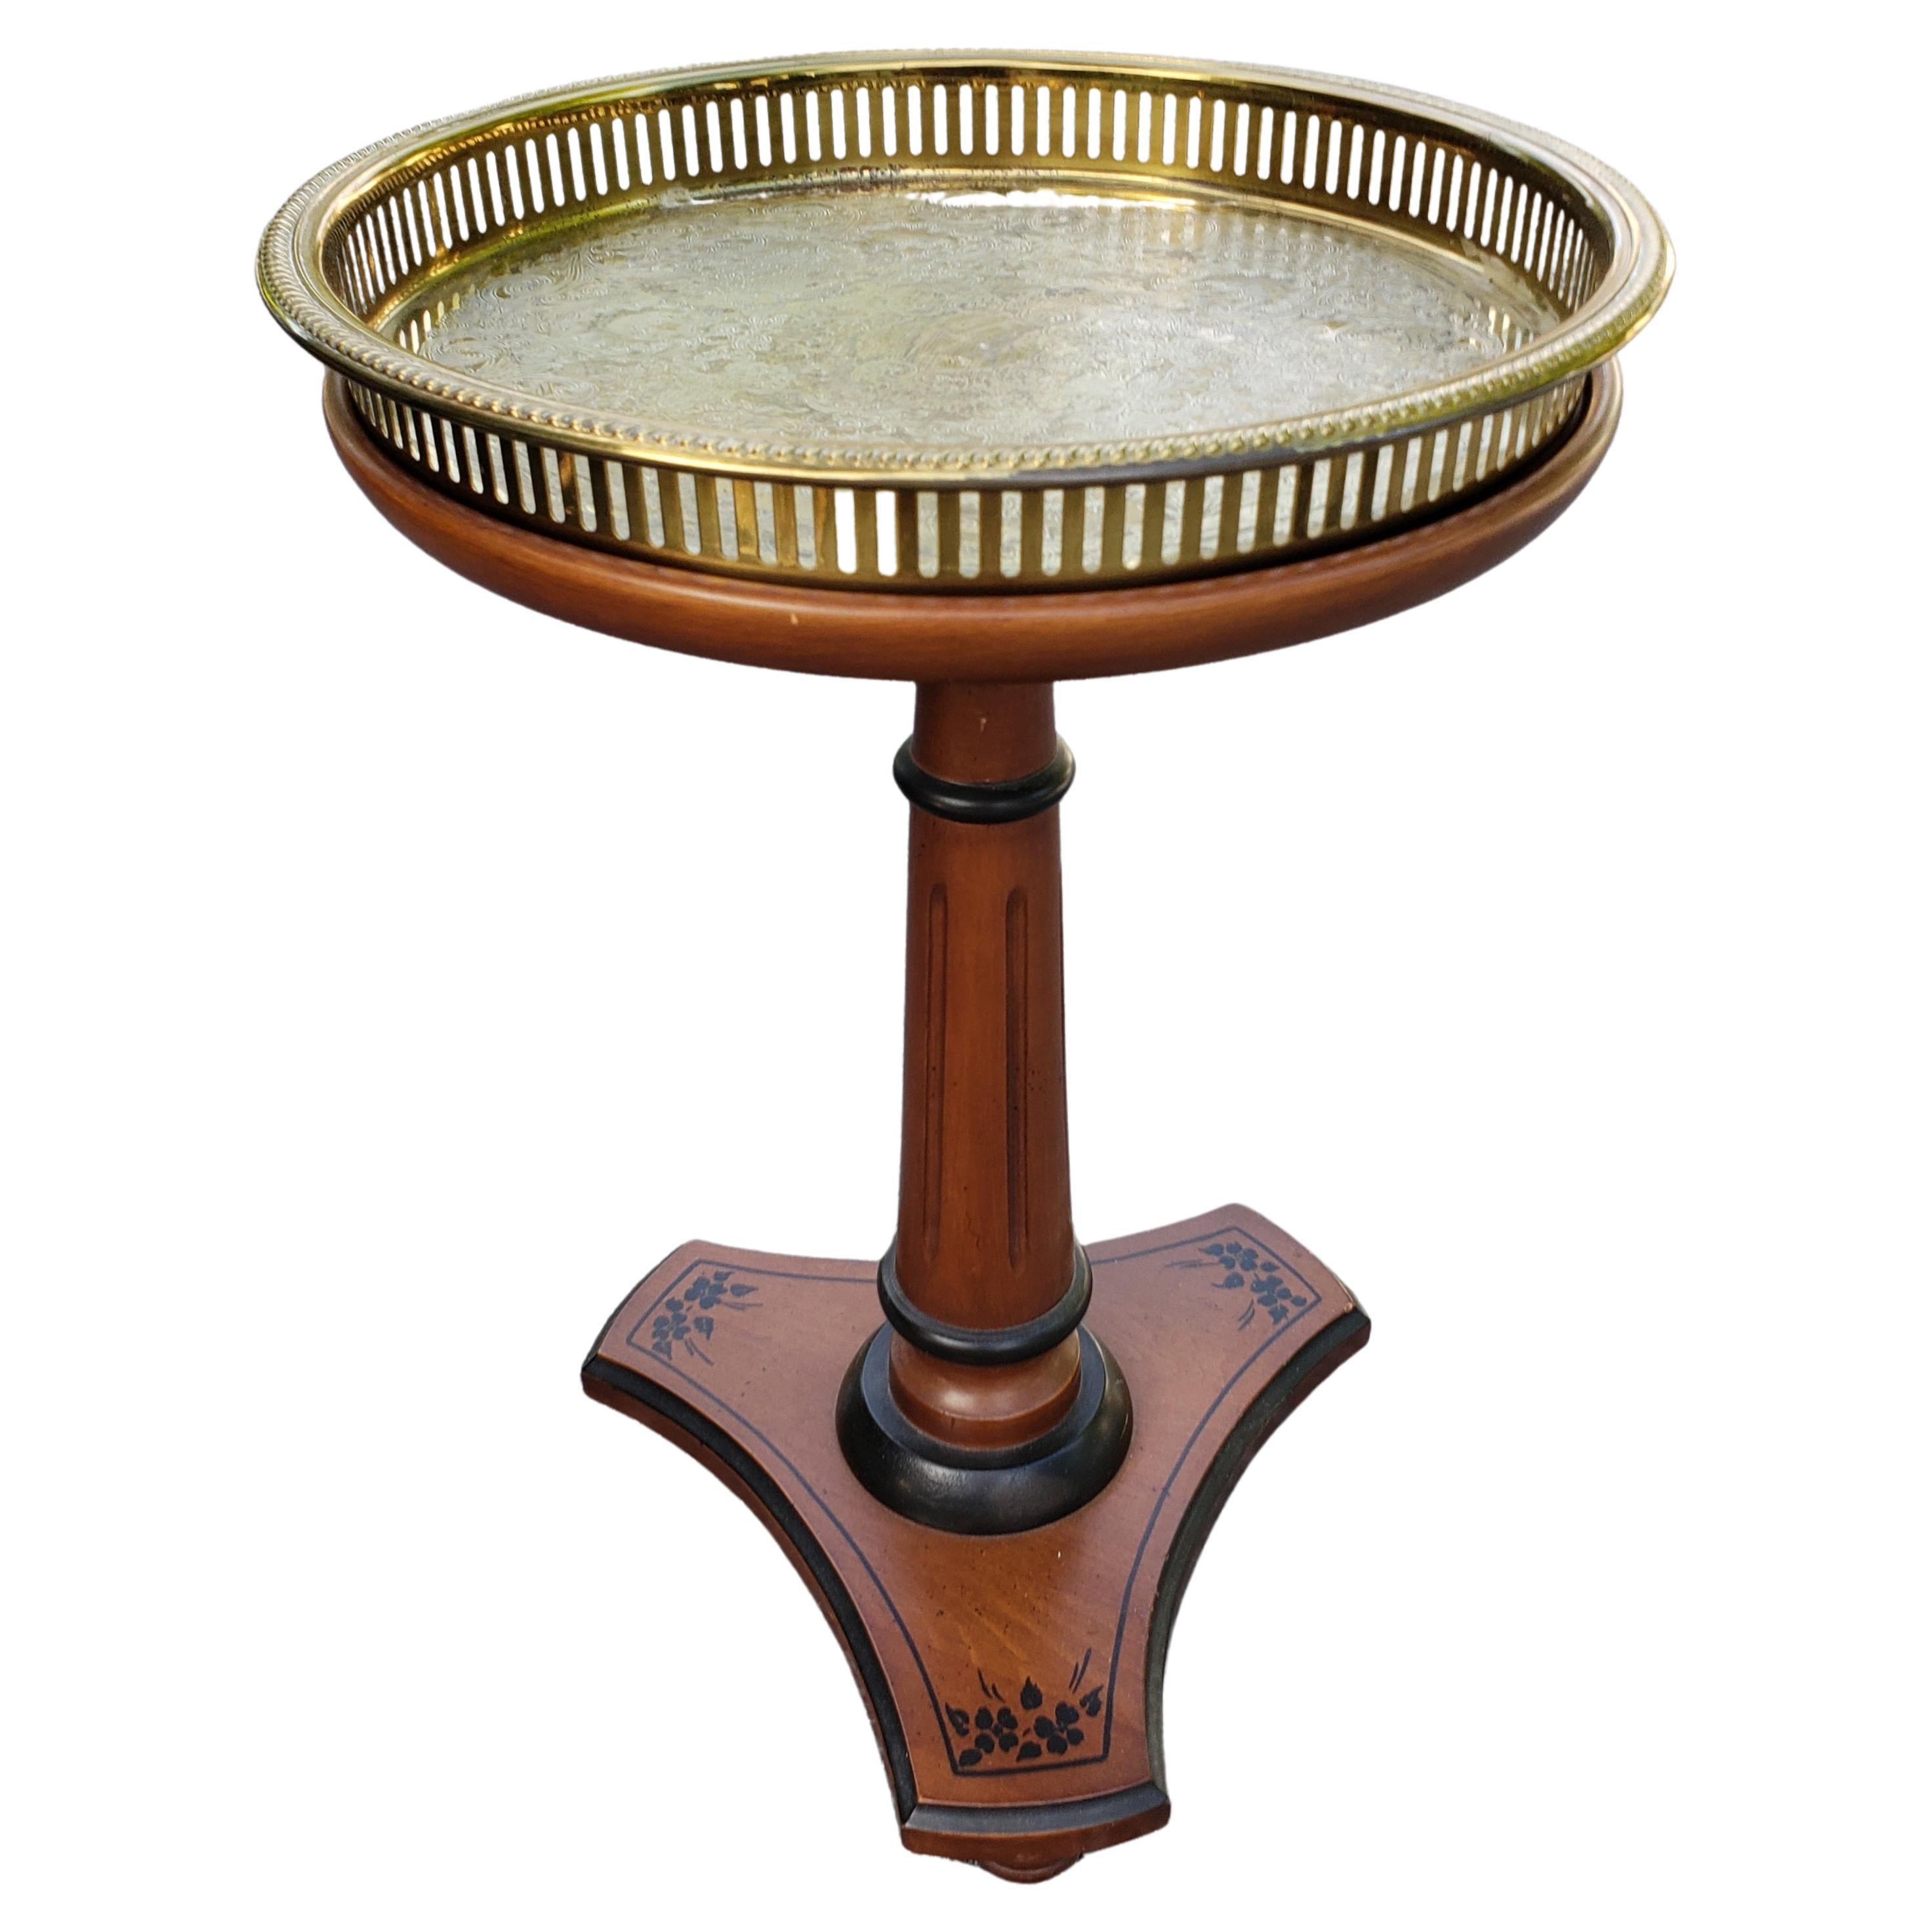 Late 20th C. Pedestal Walnut Candle Stand w/ Galleried Etched Brass Tray Insert For Sale